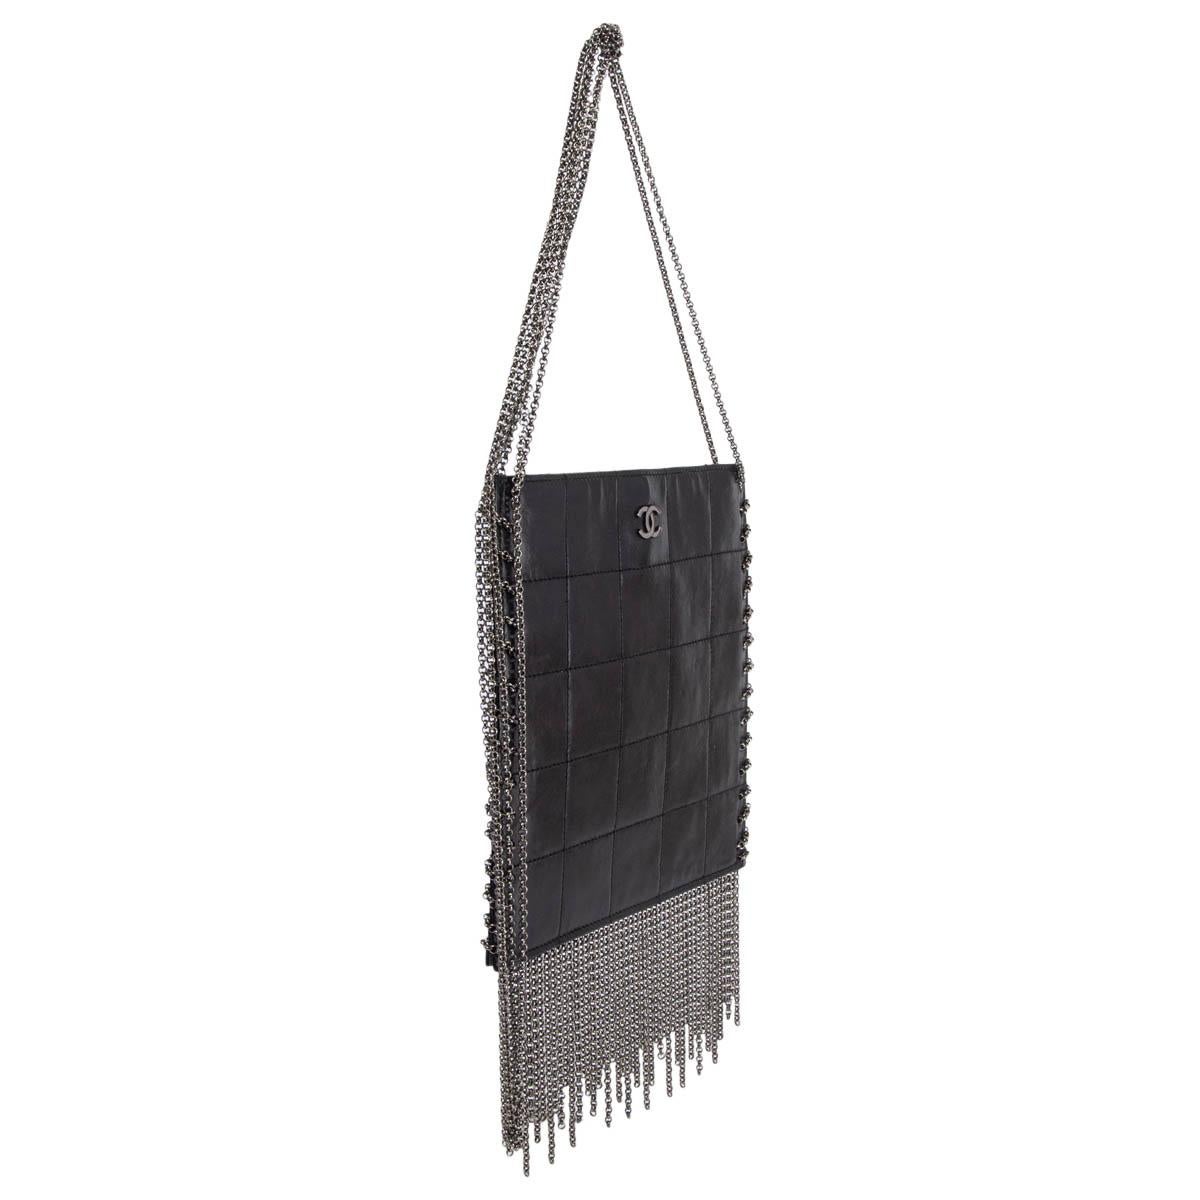 100% authentic Chanel 2002 quilted chain fringe square shoulder bag in black smooth lambskin featuring gunmetal chain details. Opens with a magnetic button on top and is lined in black logo nylon with an open pocket against the back. Has been